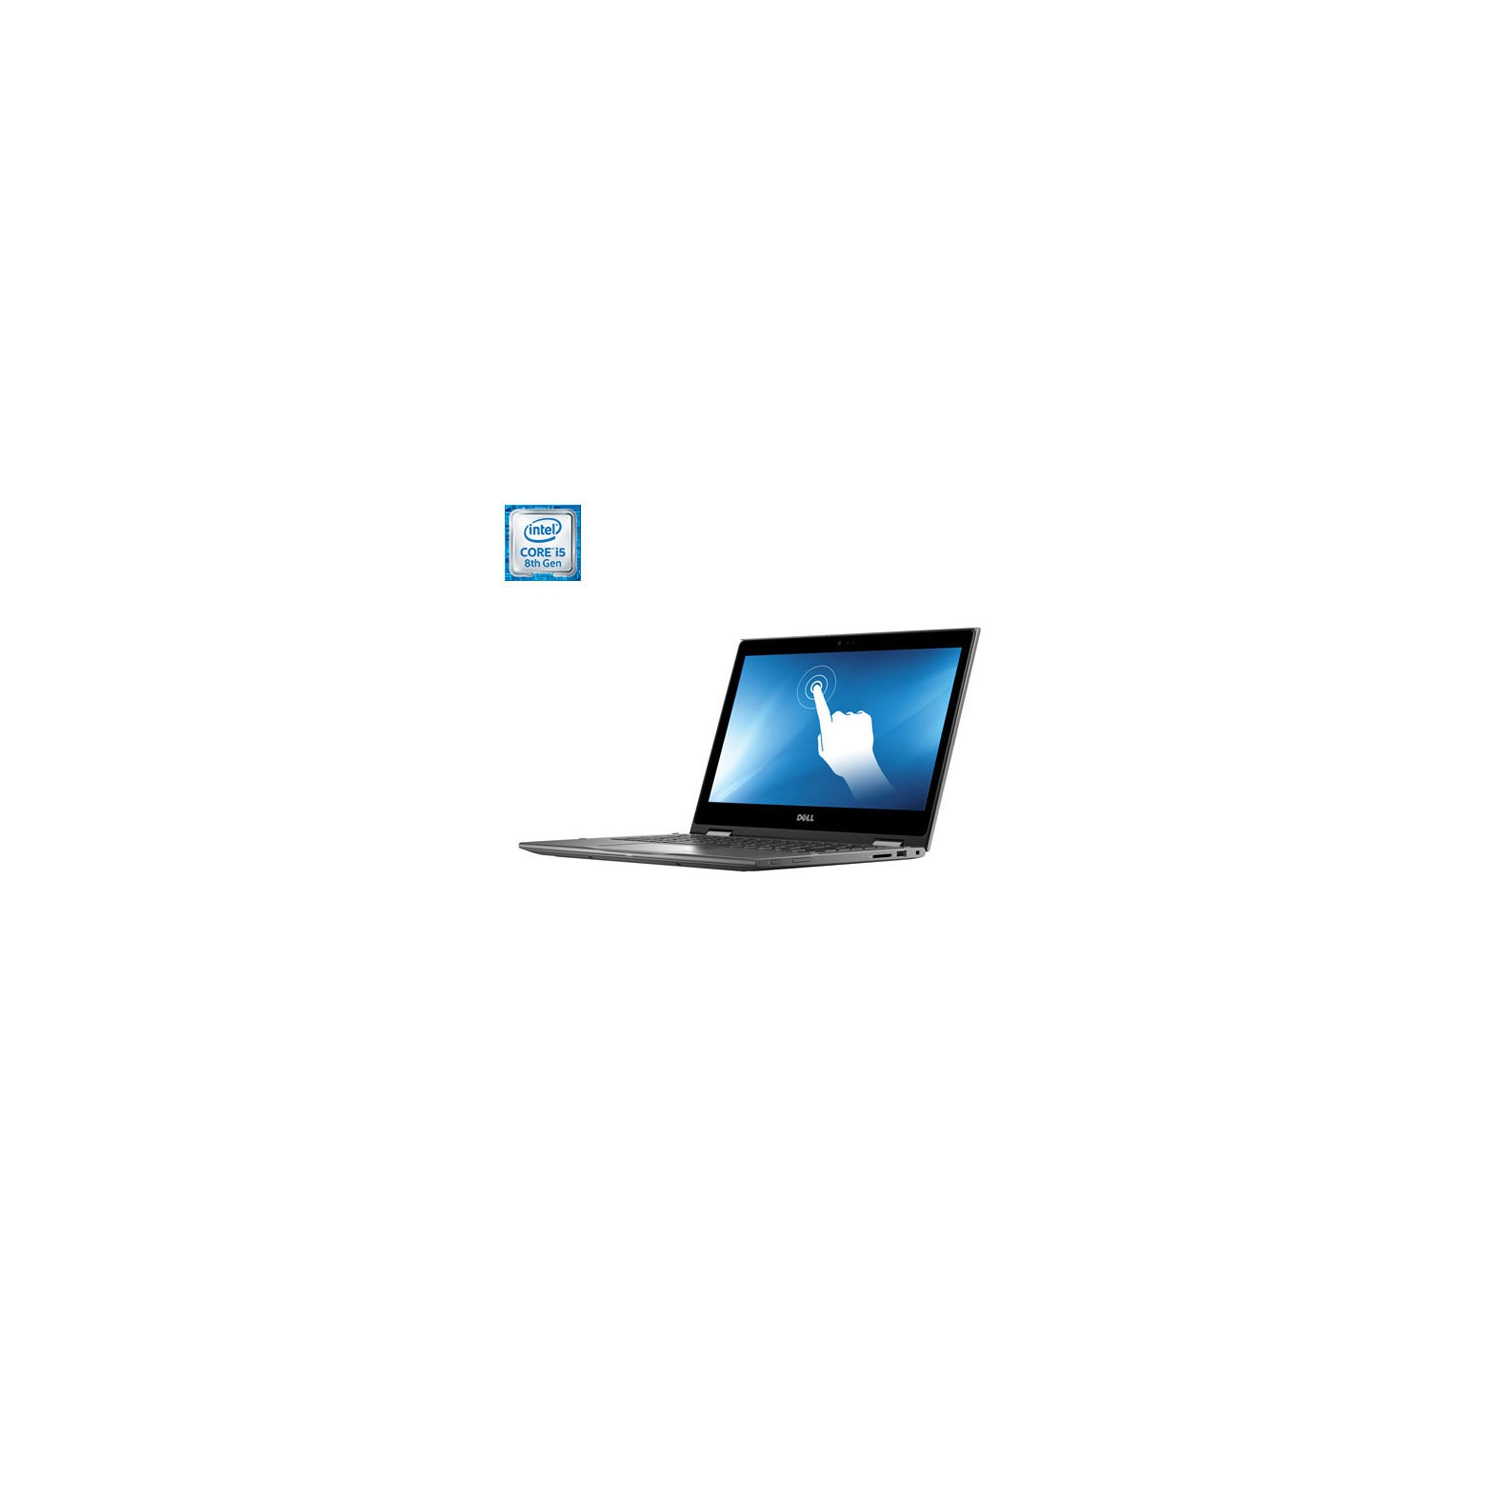 Refurbished (Excellent) -Dell Inspiron 13.3" 2-in-1 Laptop -Theoretical Grey (Intel i5-8250U/1TB HDD/8GB RAM) -Eng